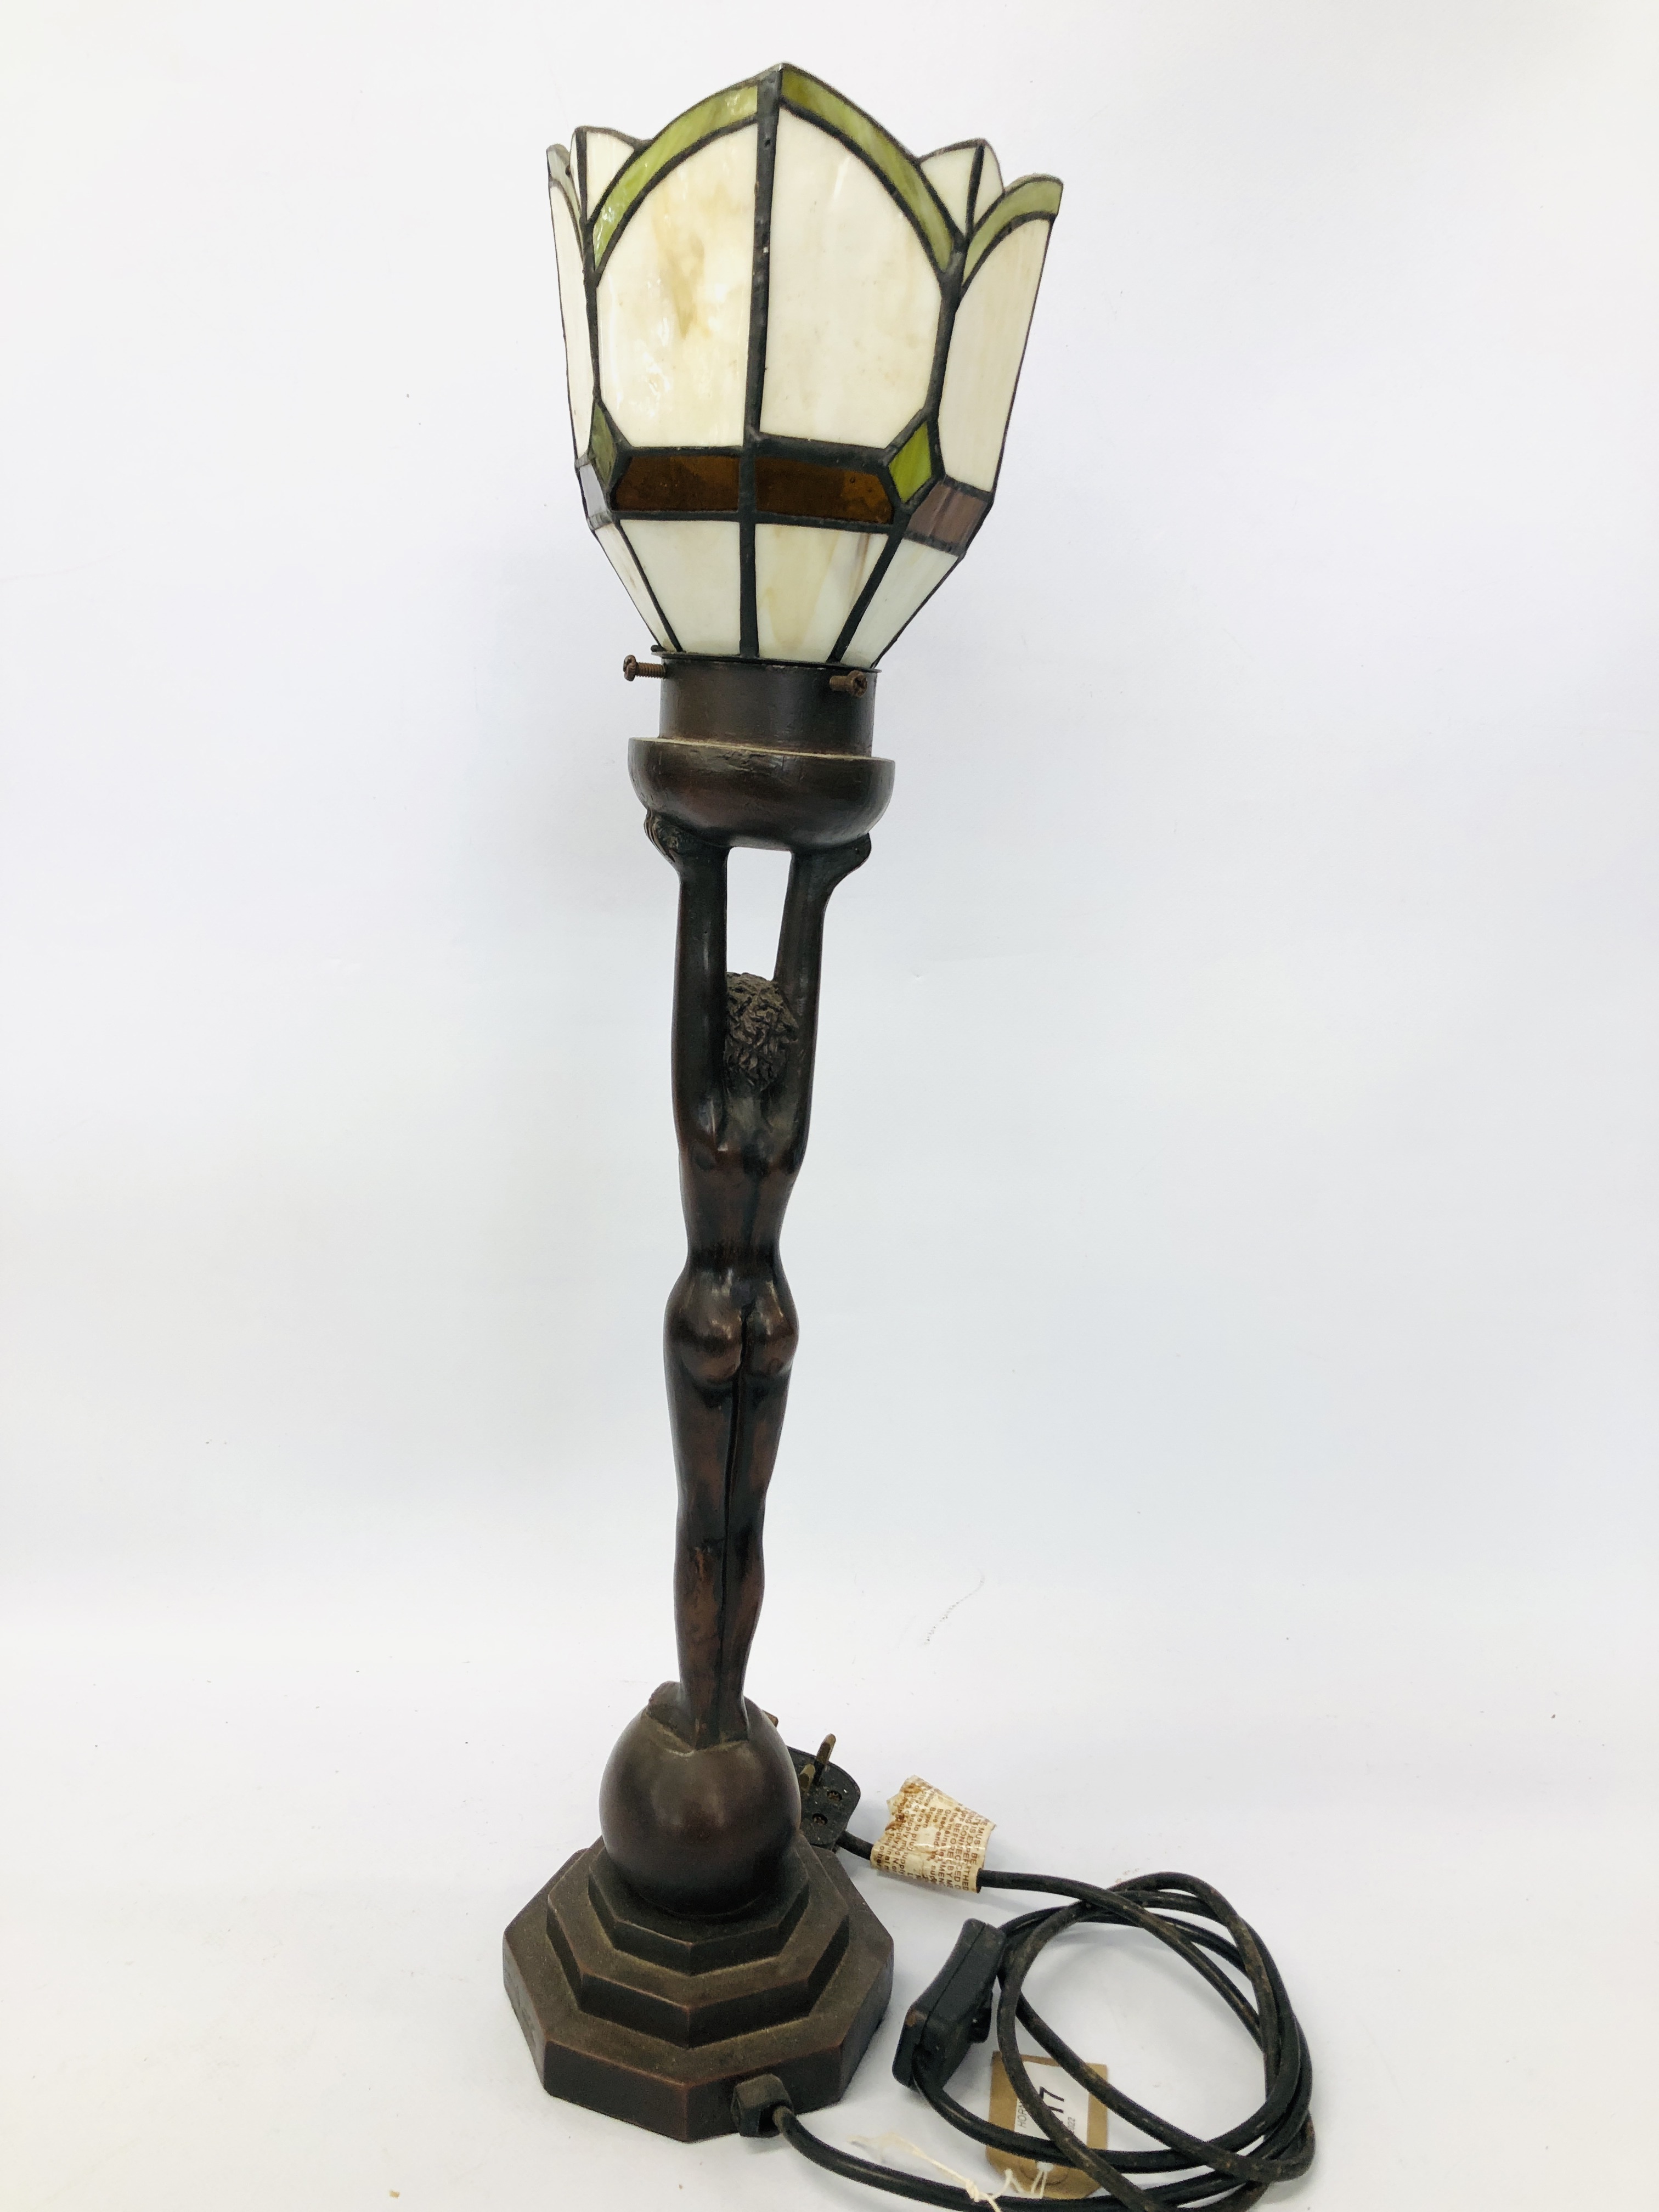 REPRODUCTION DECO STYLE TABLE LAMP THE GLASS STAIN GLASS SHADE SUPPORTED BY NUDE FEMALE STANDING ON - Image 5 of 5